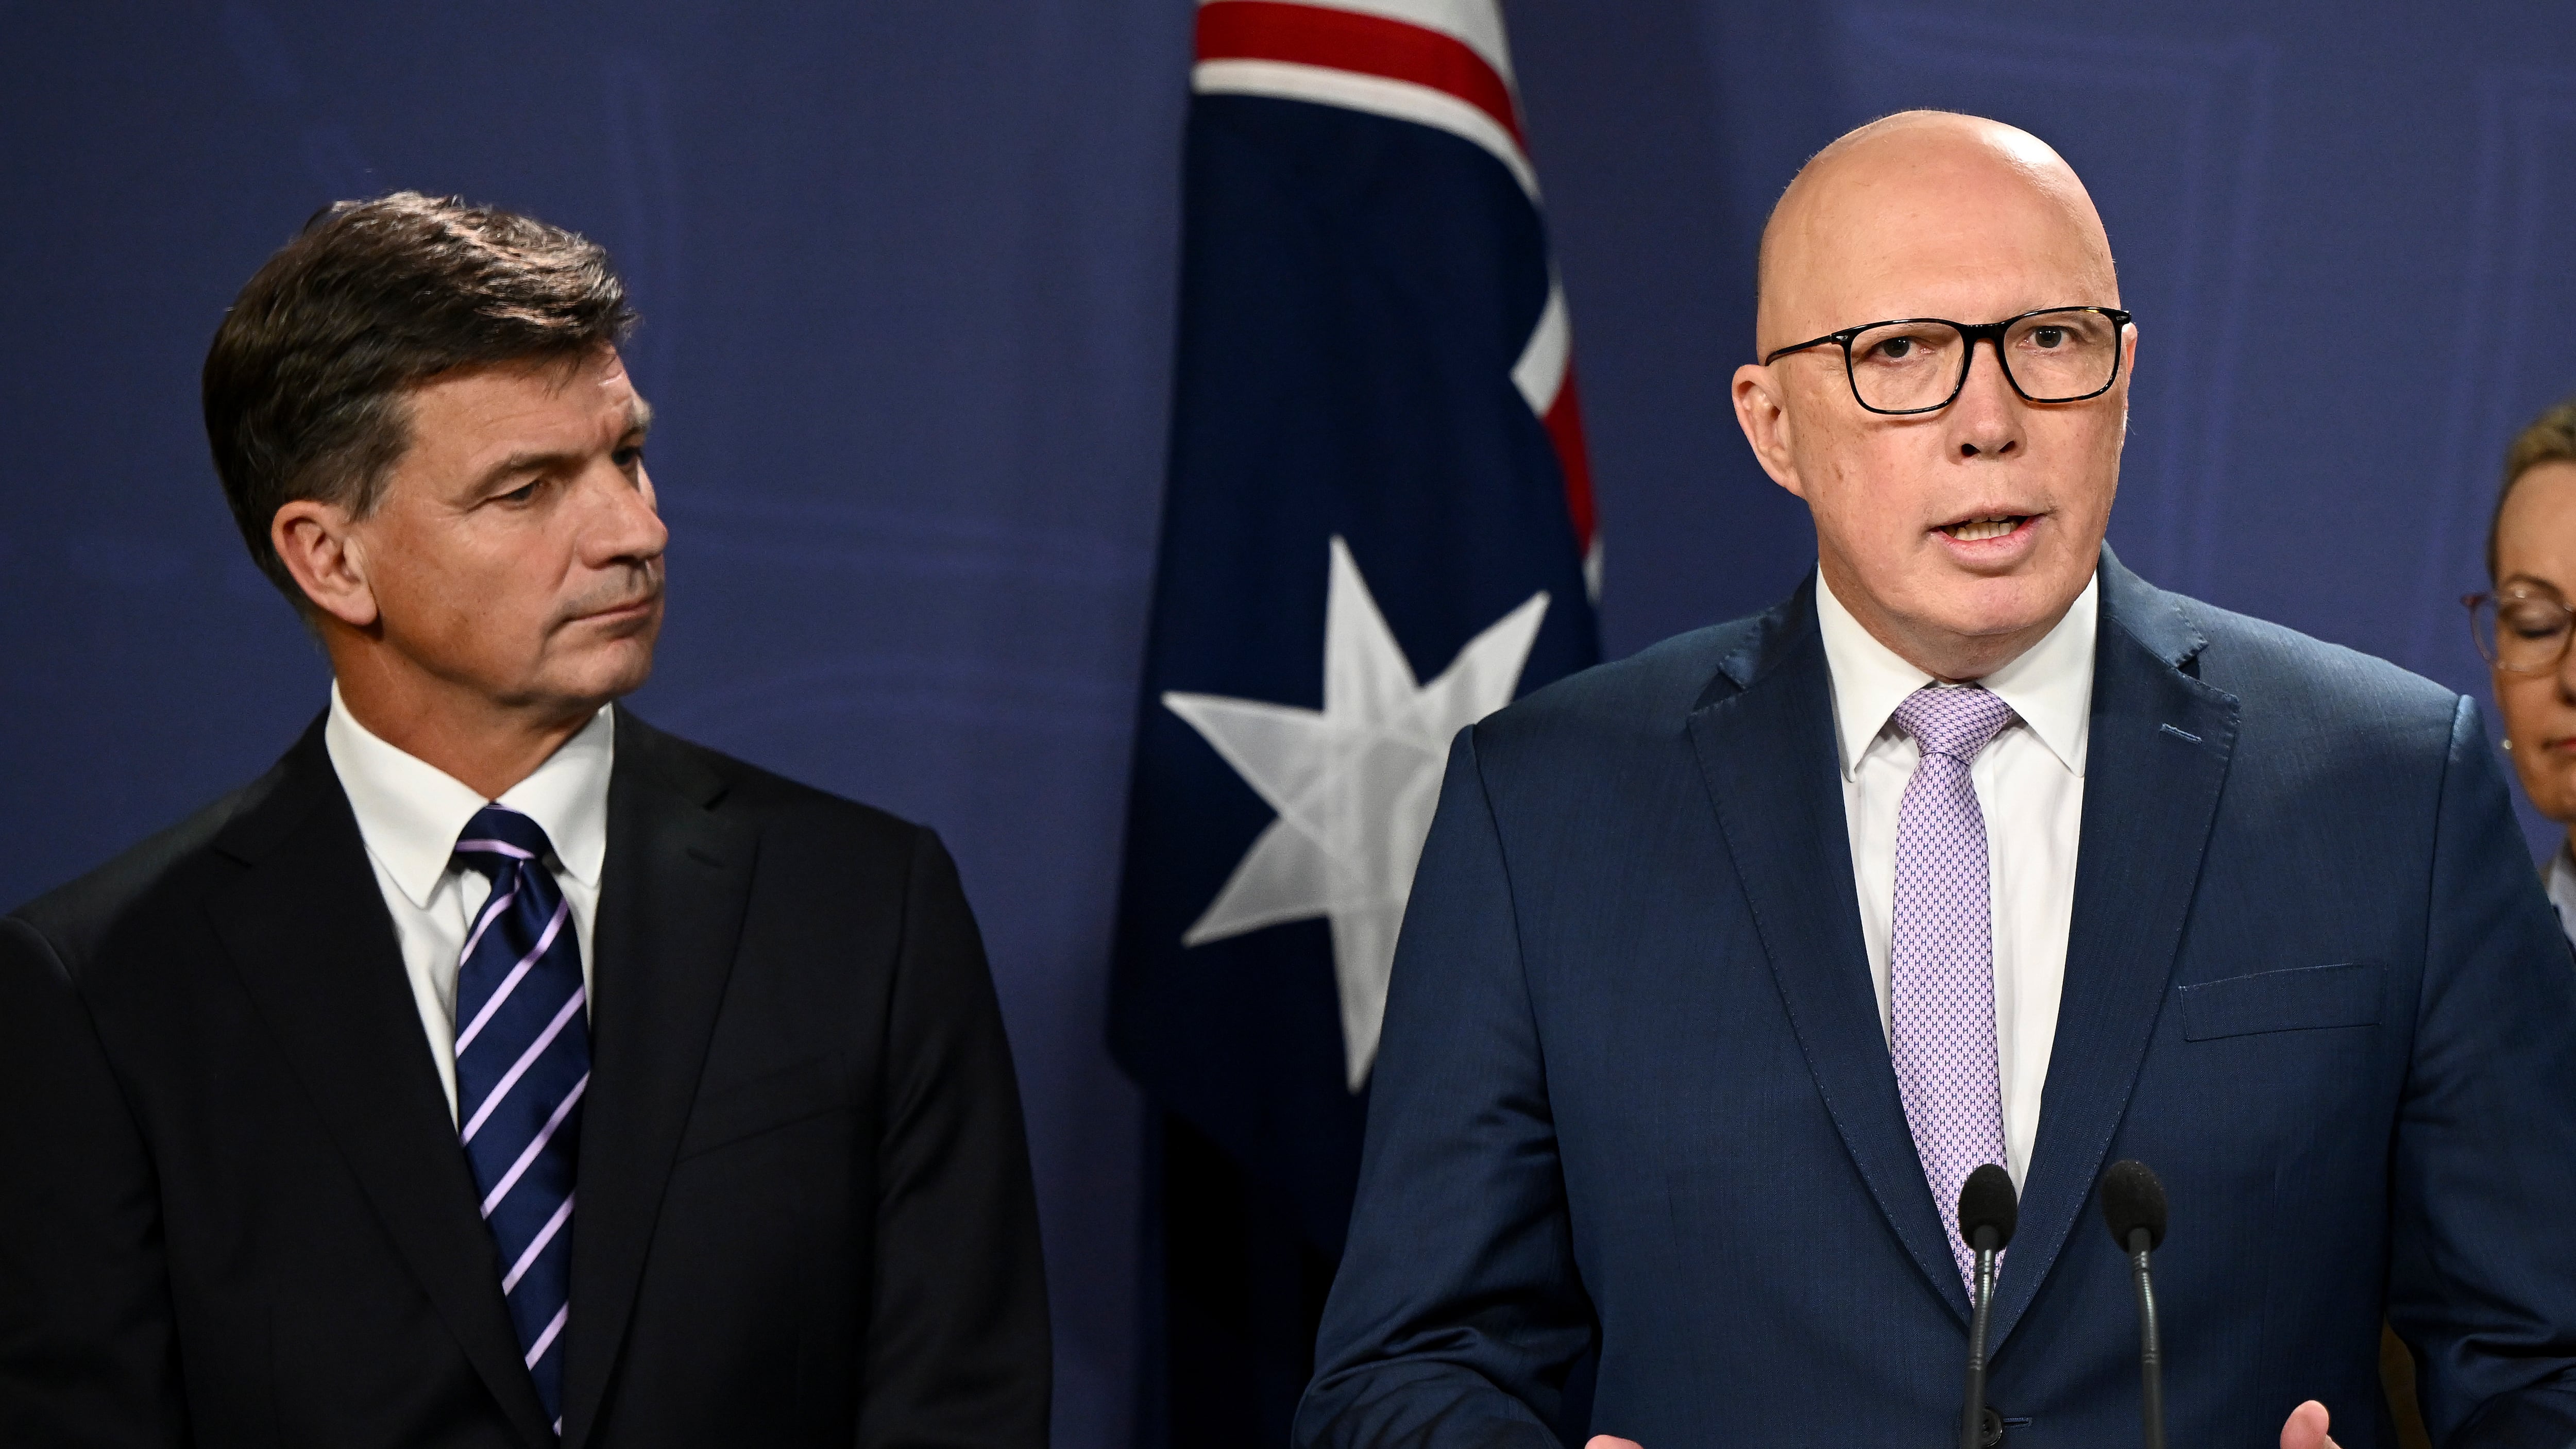 Opposition Leader Peter Dutton unveils details of proposed nuclear energy plan as Shadow Treasurer Angus Taylor, left, looks on during a press conference (Bianca de Marchi/AP)